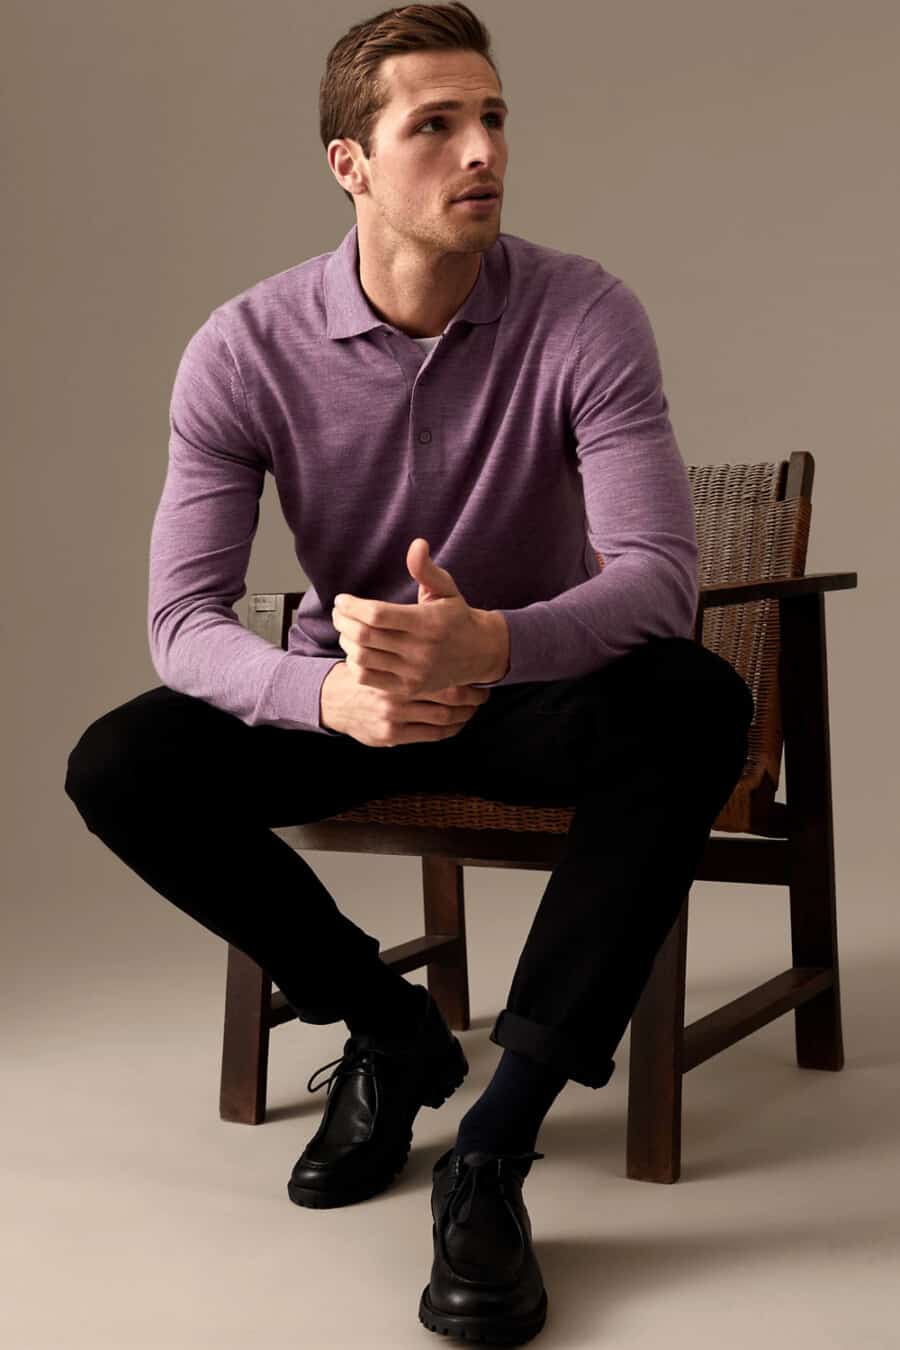 Men's black pants, long sleeve purple knitted polo shirt and black leather shoes outfit